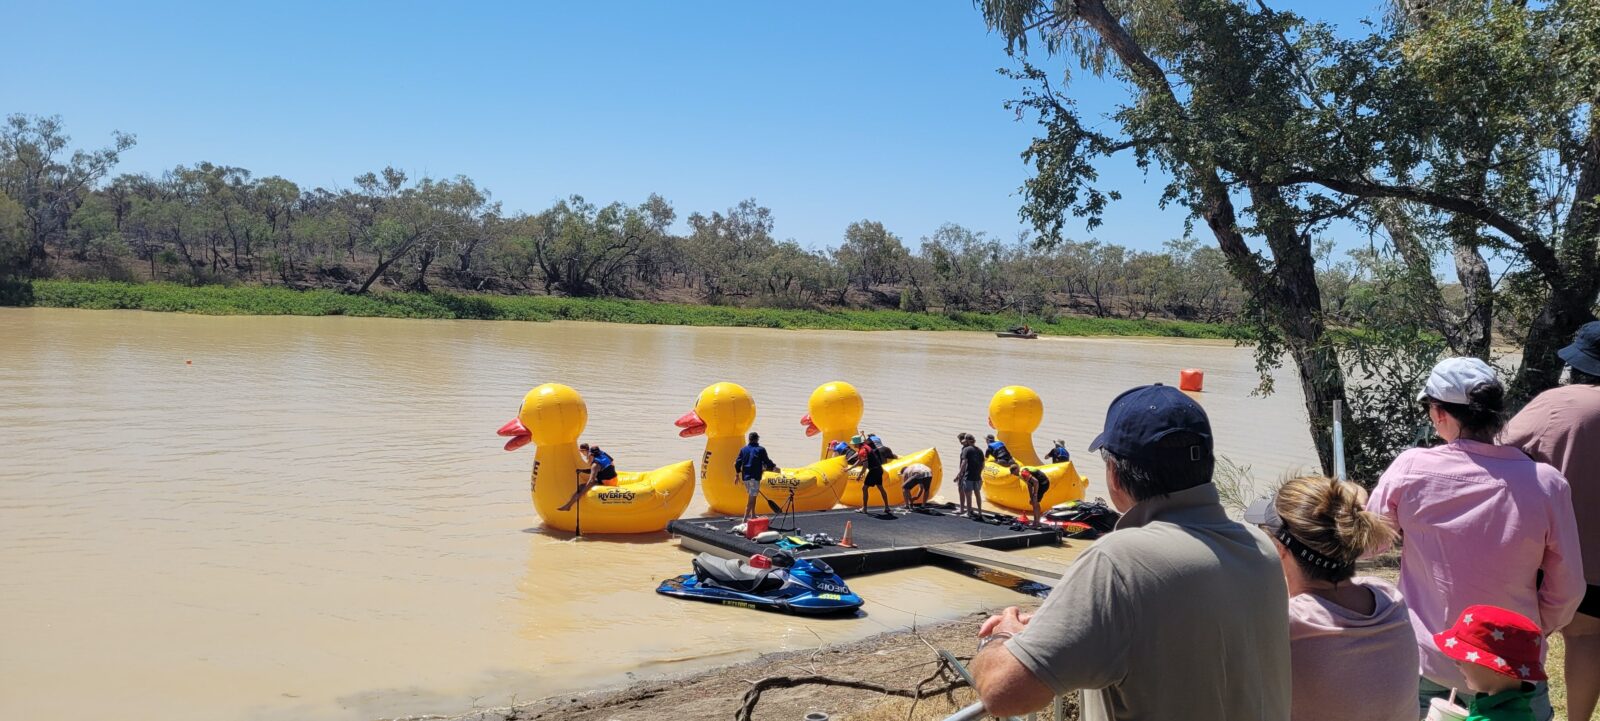 Inflatable ducks on the thomson River